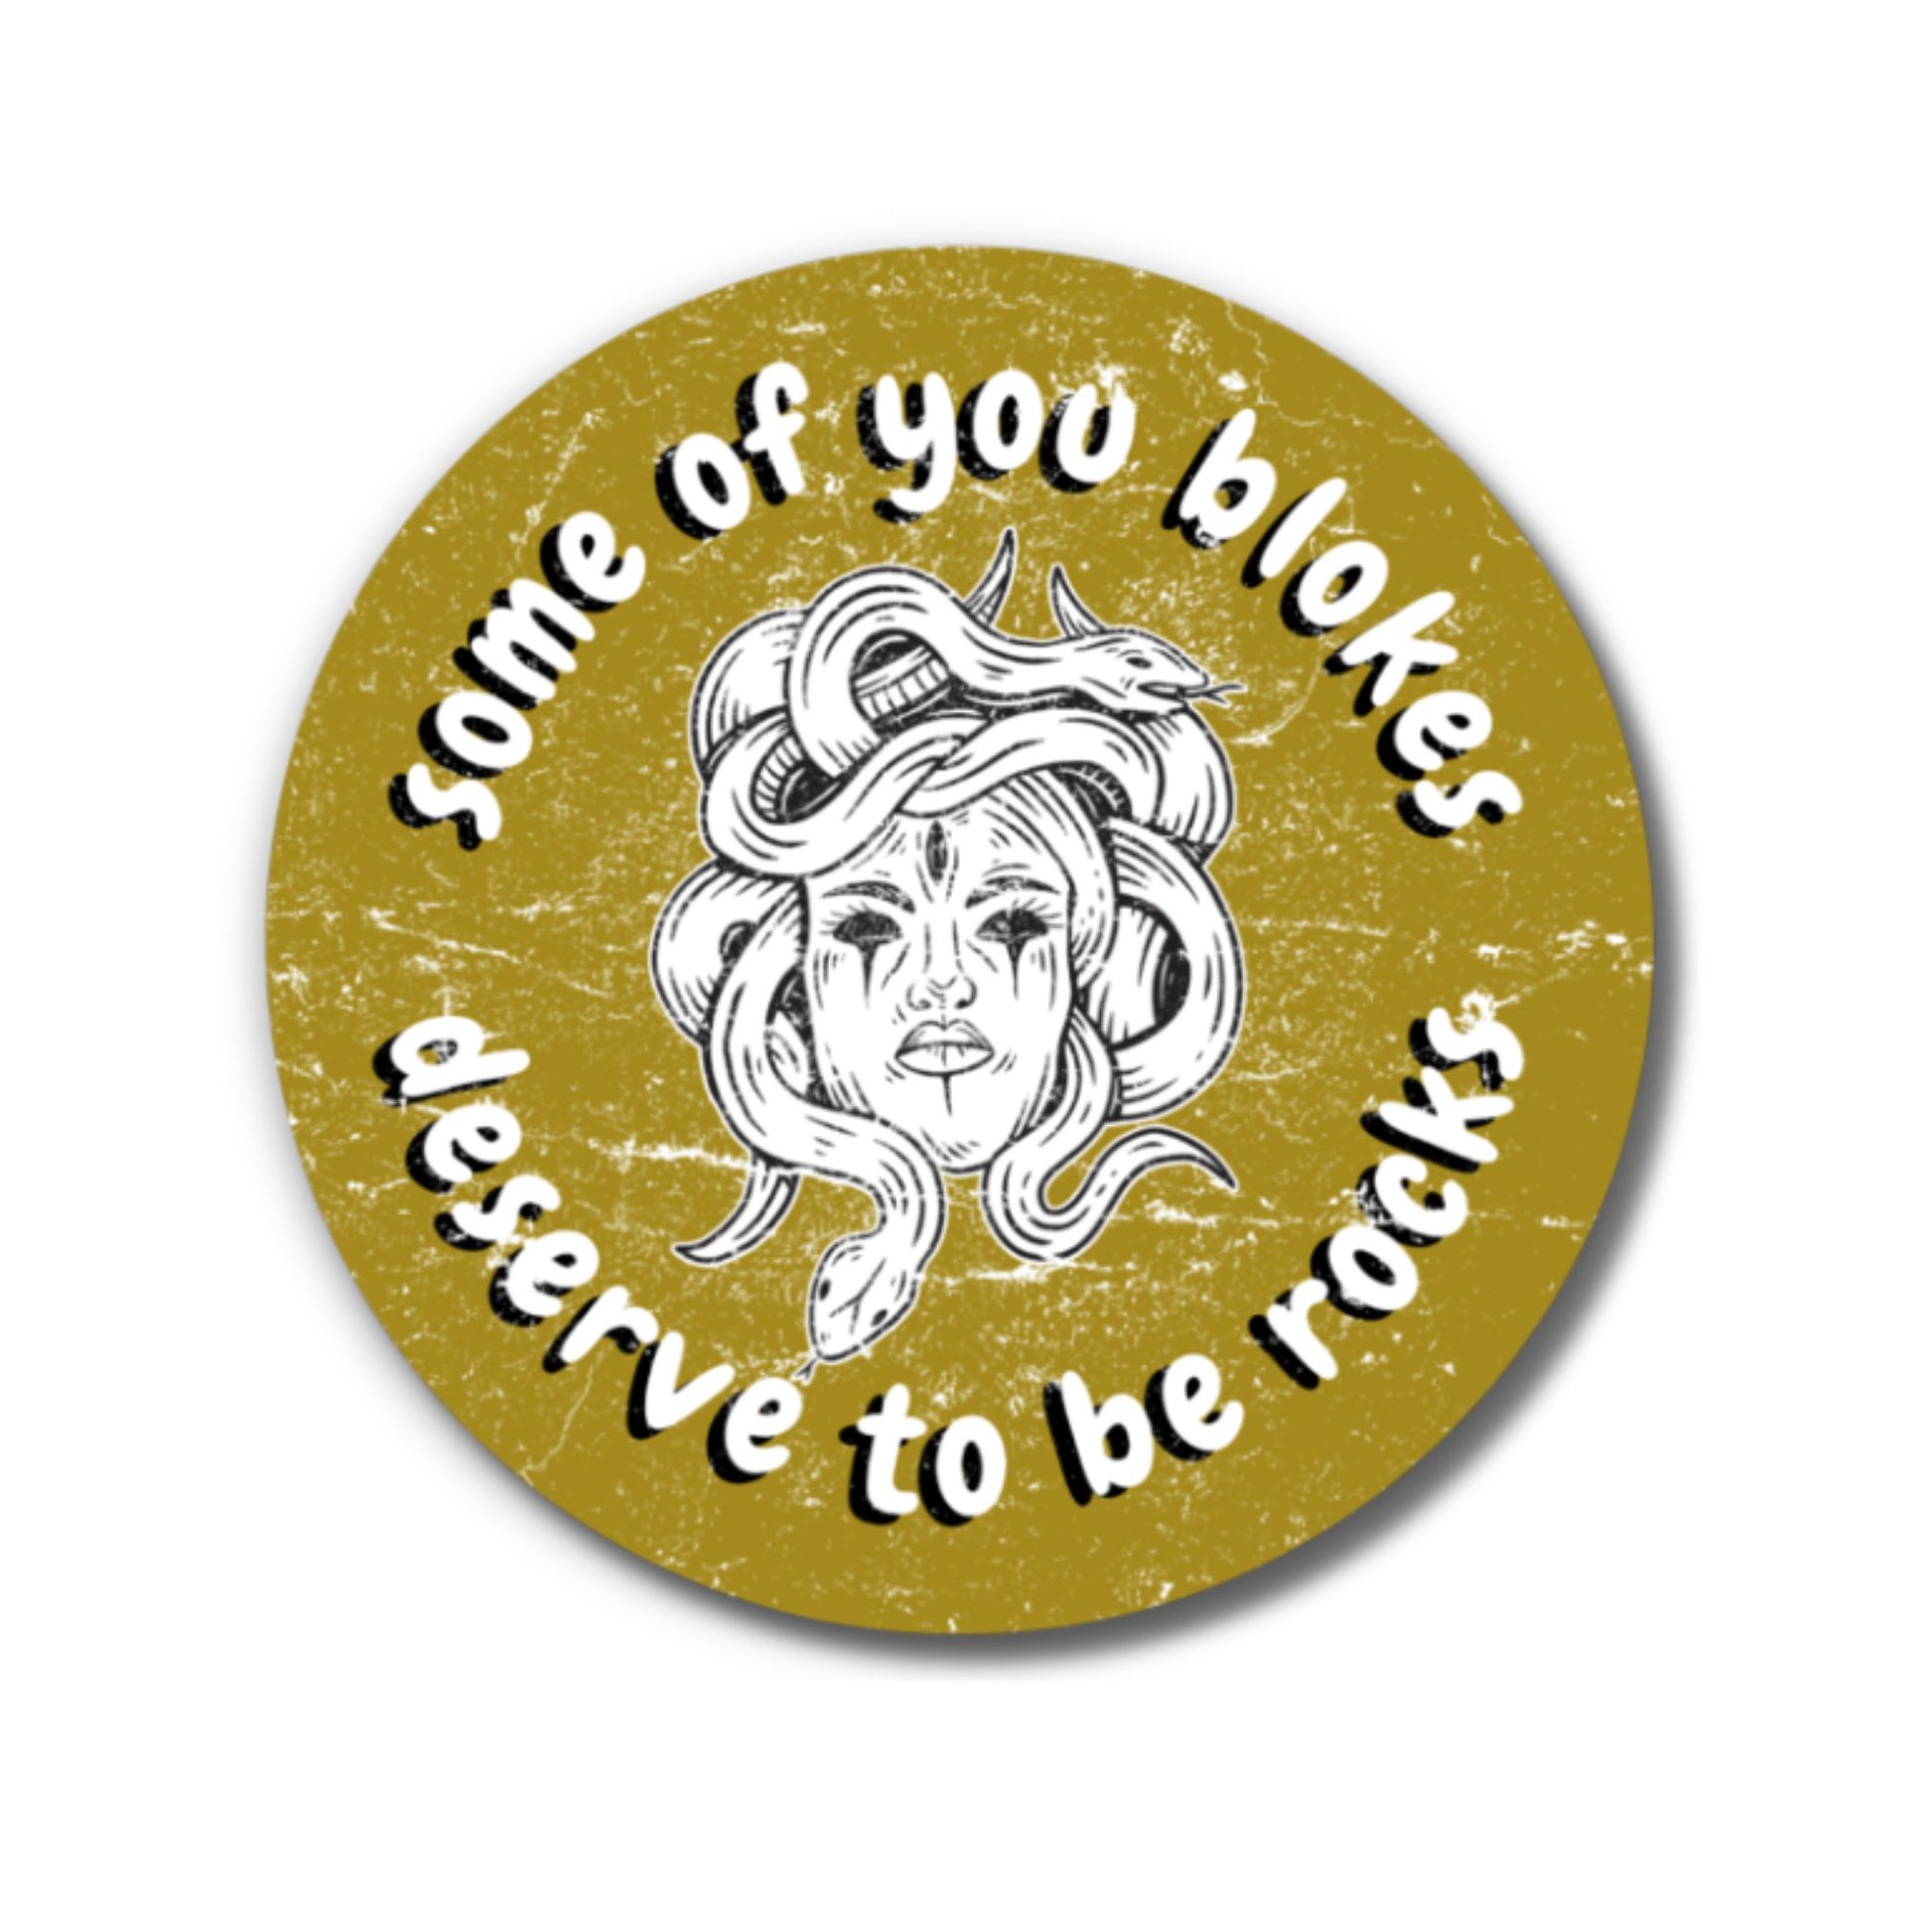 Medusa Some Of You Blokes Deserve to Be Rocks Sticker | Vinyl Die Cut Decal